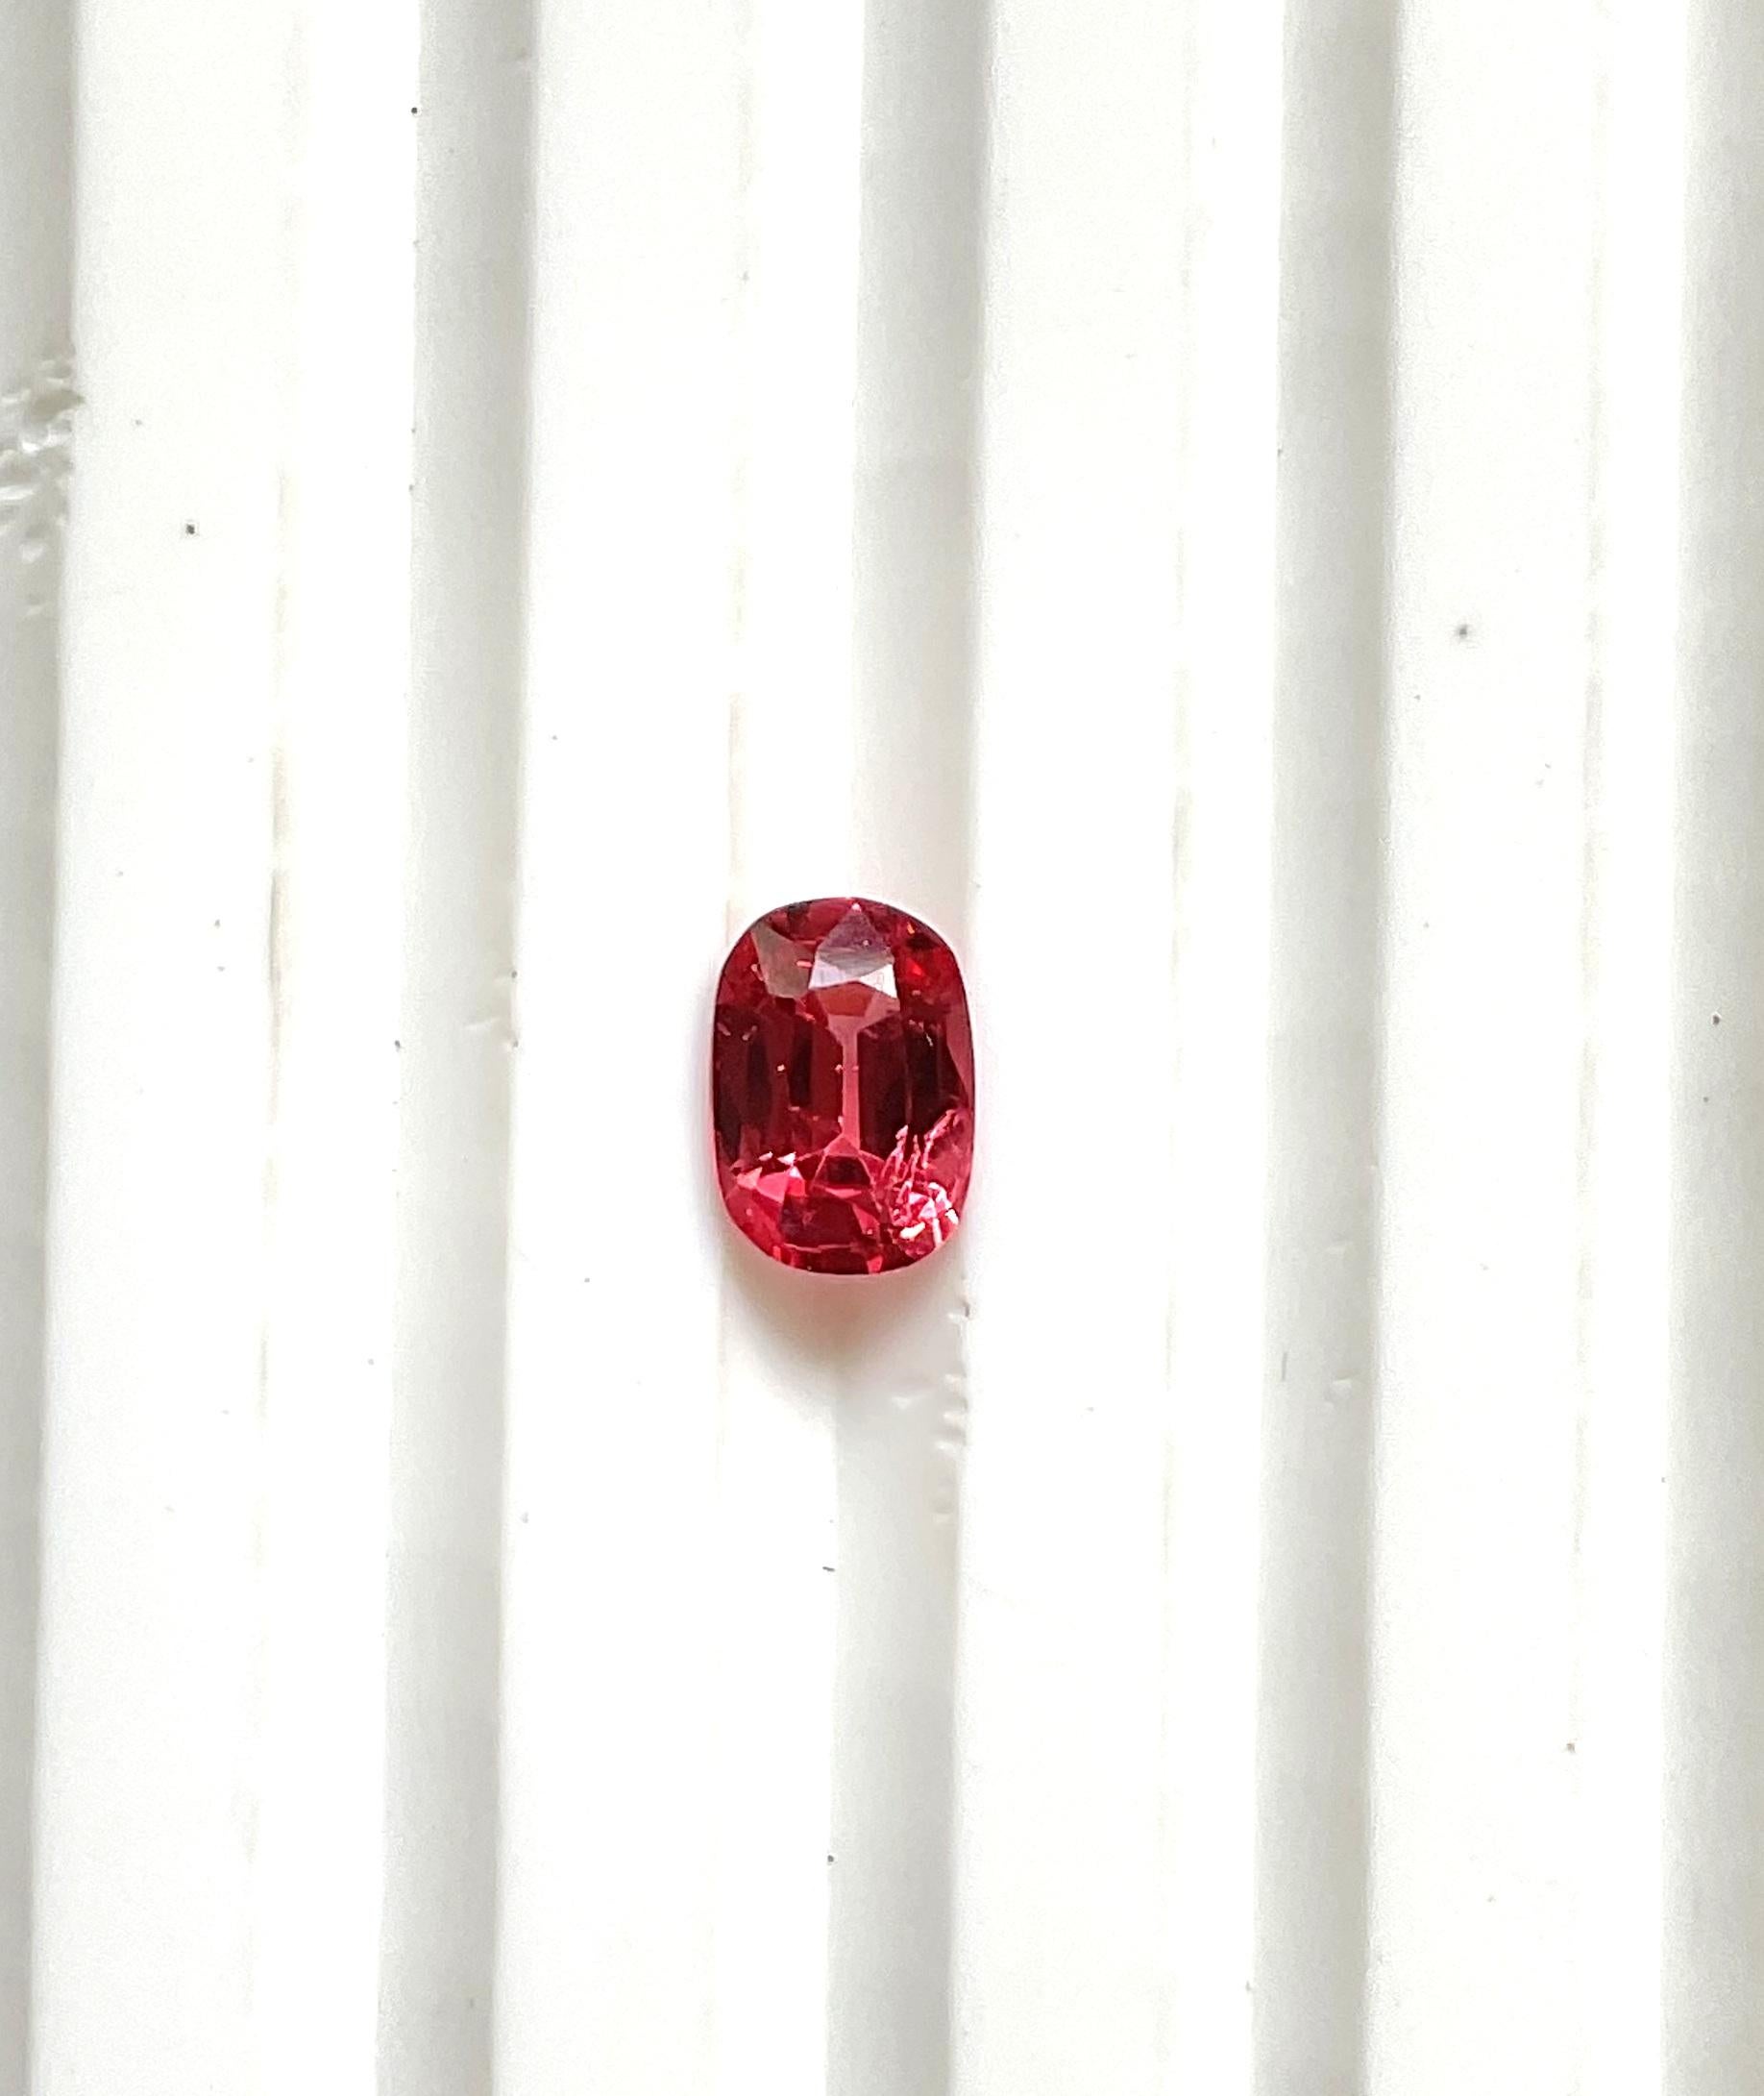 Burmese no heat orangish red spinel cushion
Rare color and quality
Can be easily set into a beautiful ring !
Clarity VS
Weight: 0.74 Carats
Size: 6.3x4.5x3 MM
Pieces: 1
Shape: Faceted cushion cut stone